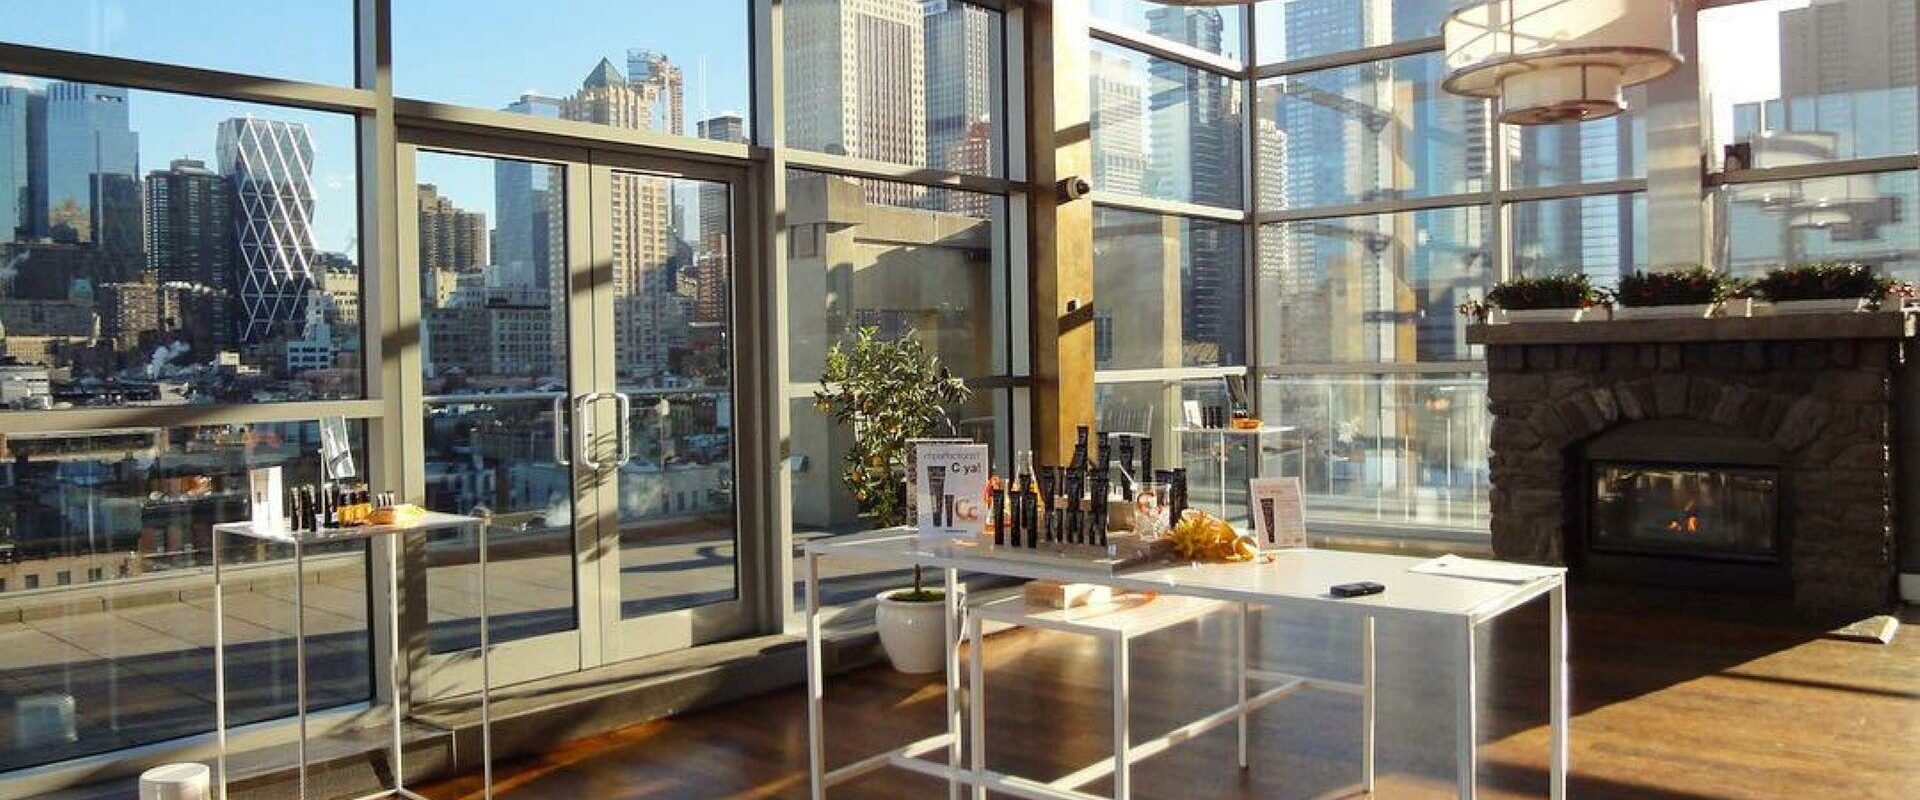 Penthouse 45 Event Space